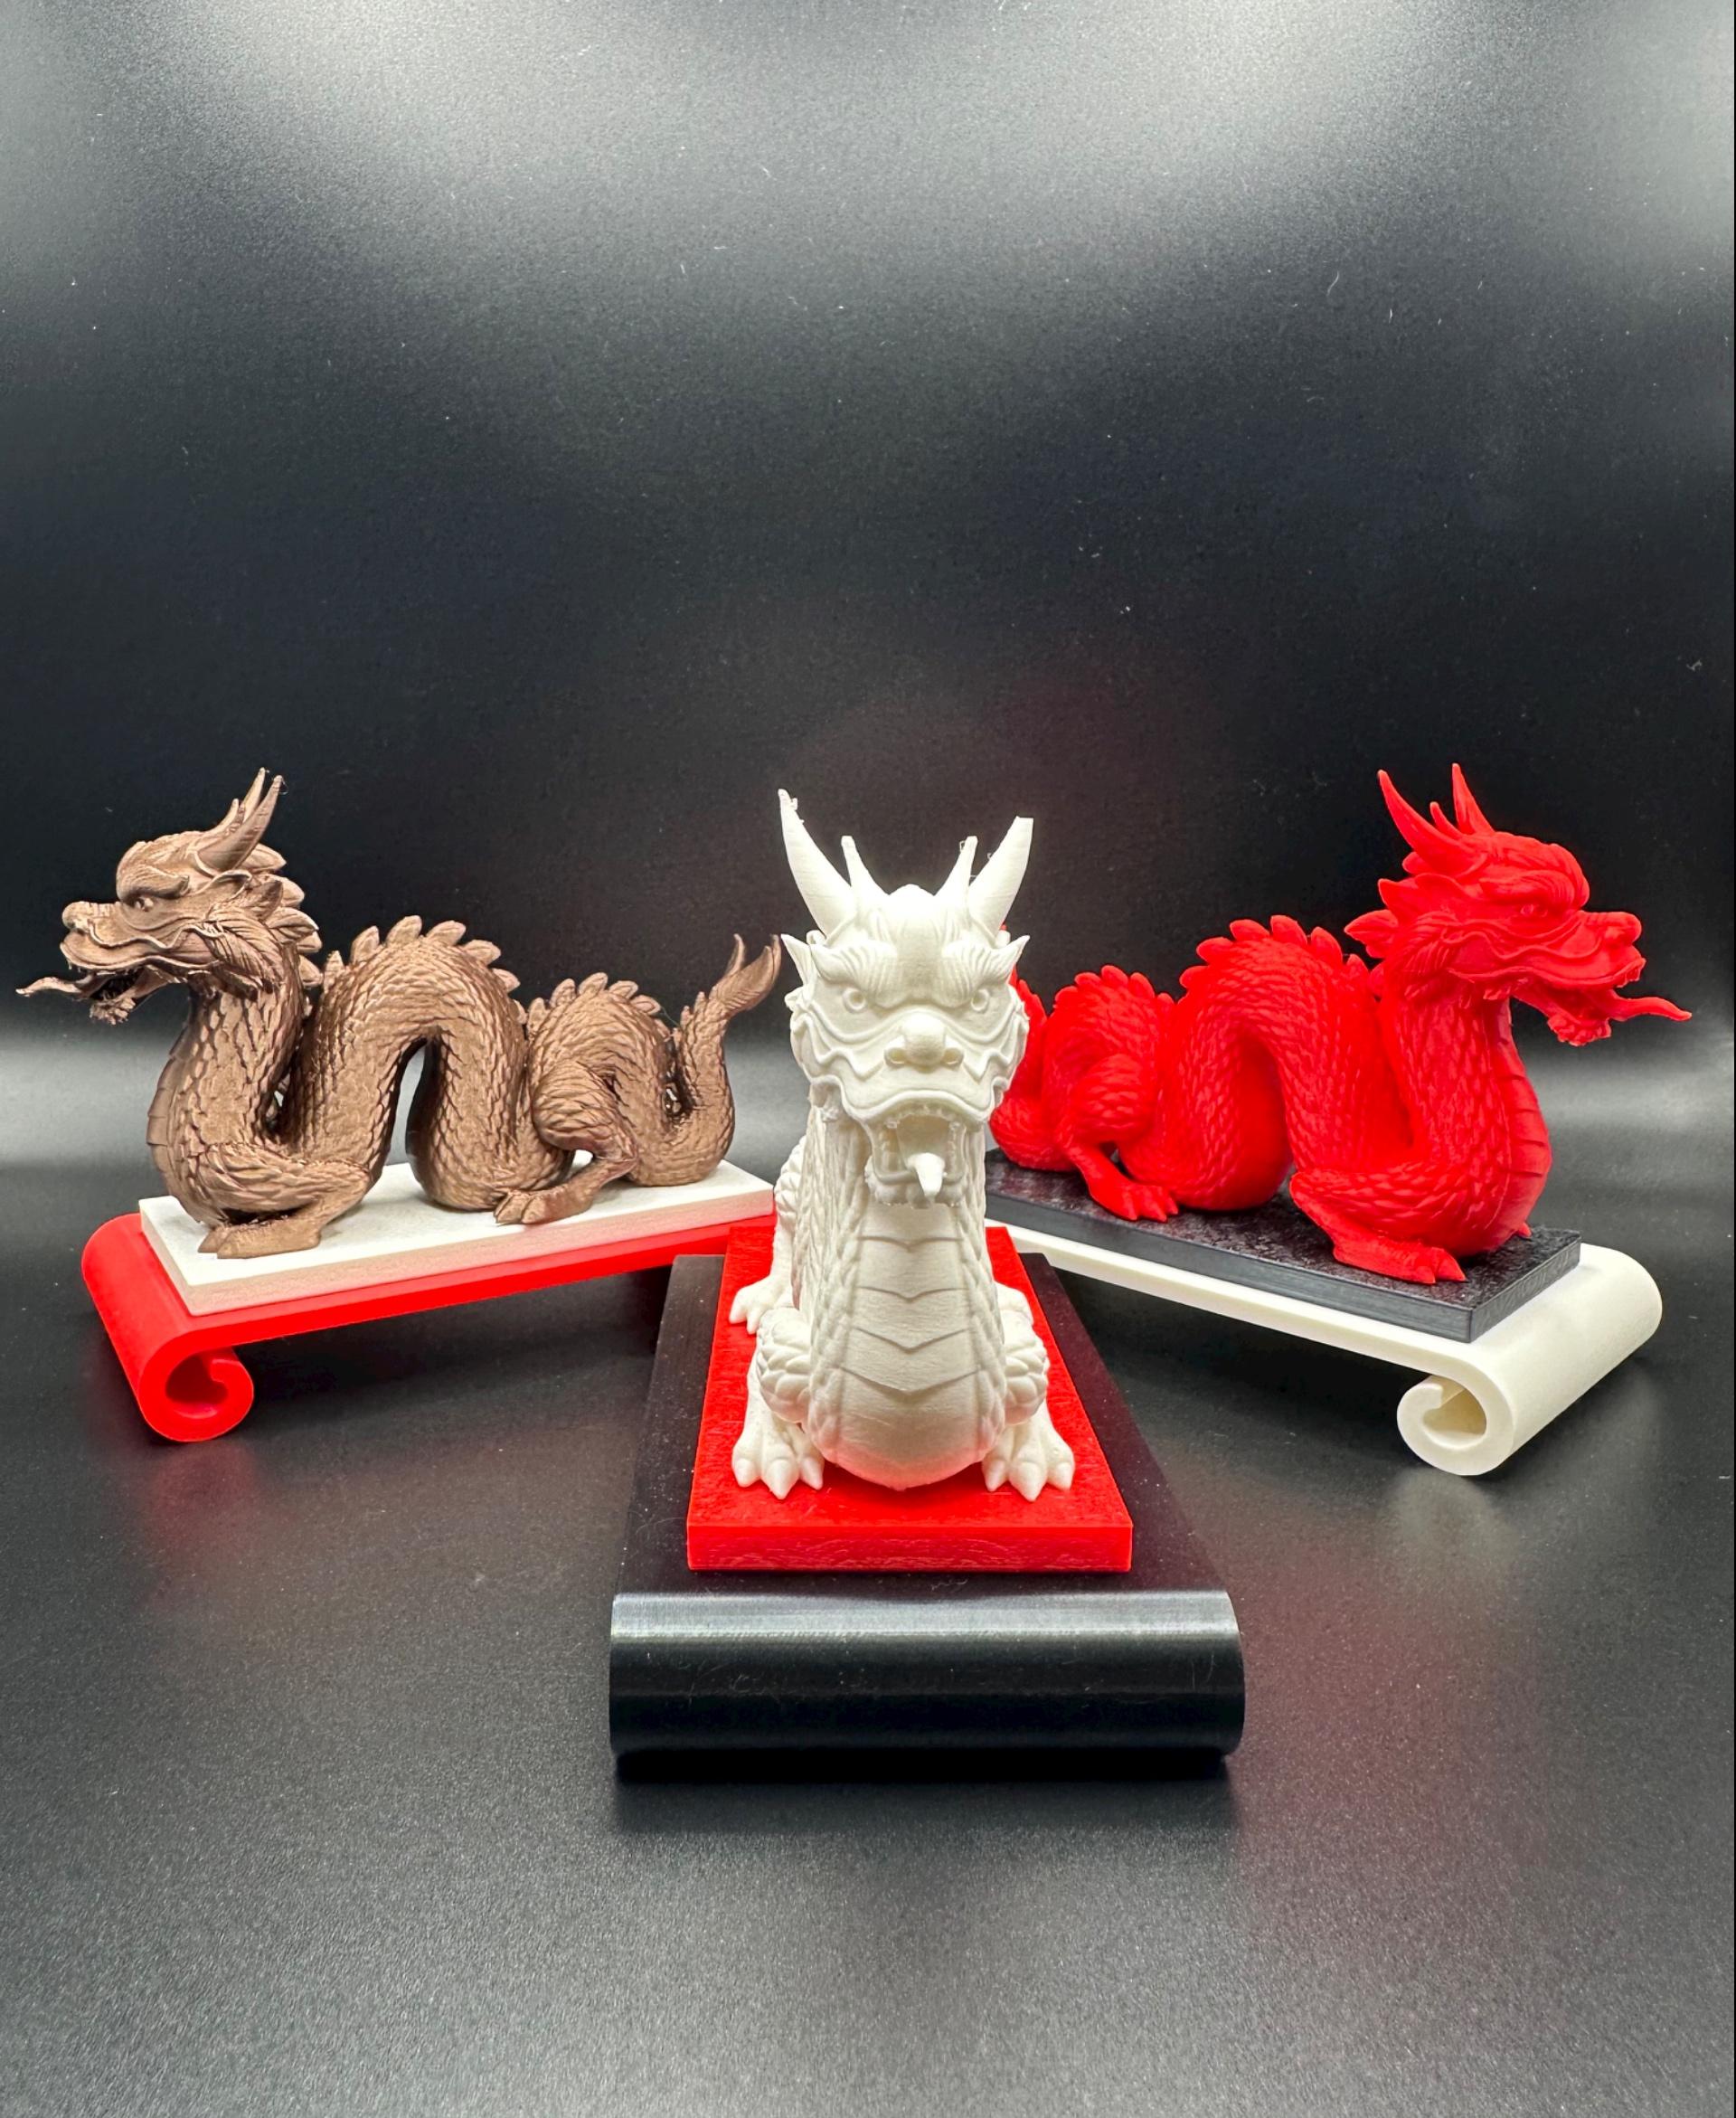 Chinese Dragon -Platform Statue - Mix and Match. Printed the parts in various colors using various filaments. Copper, red, black etc.  - 3d model